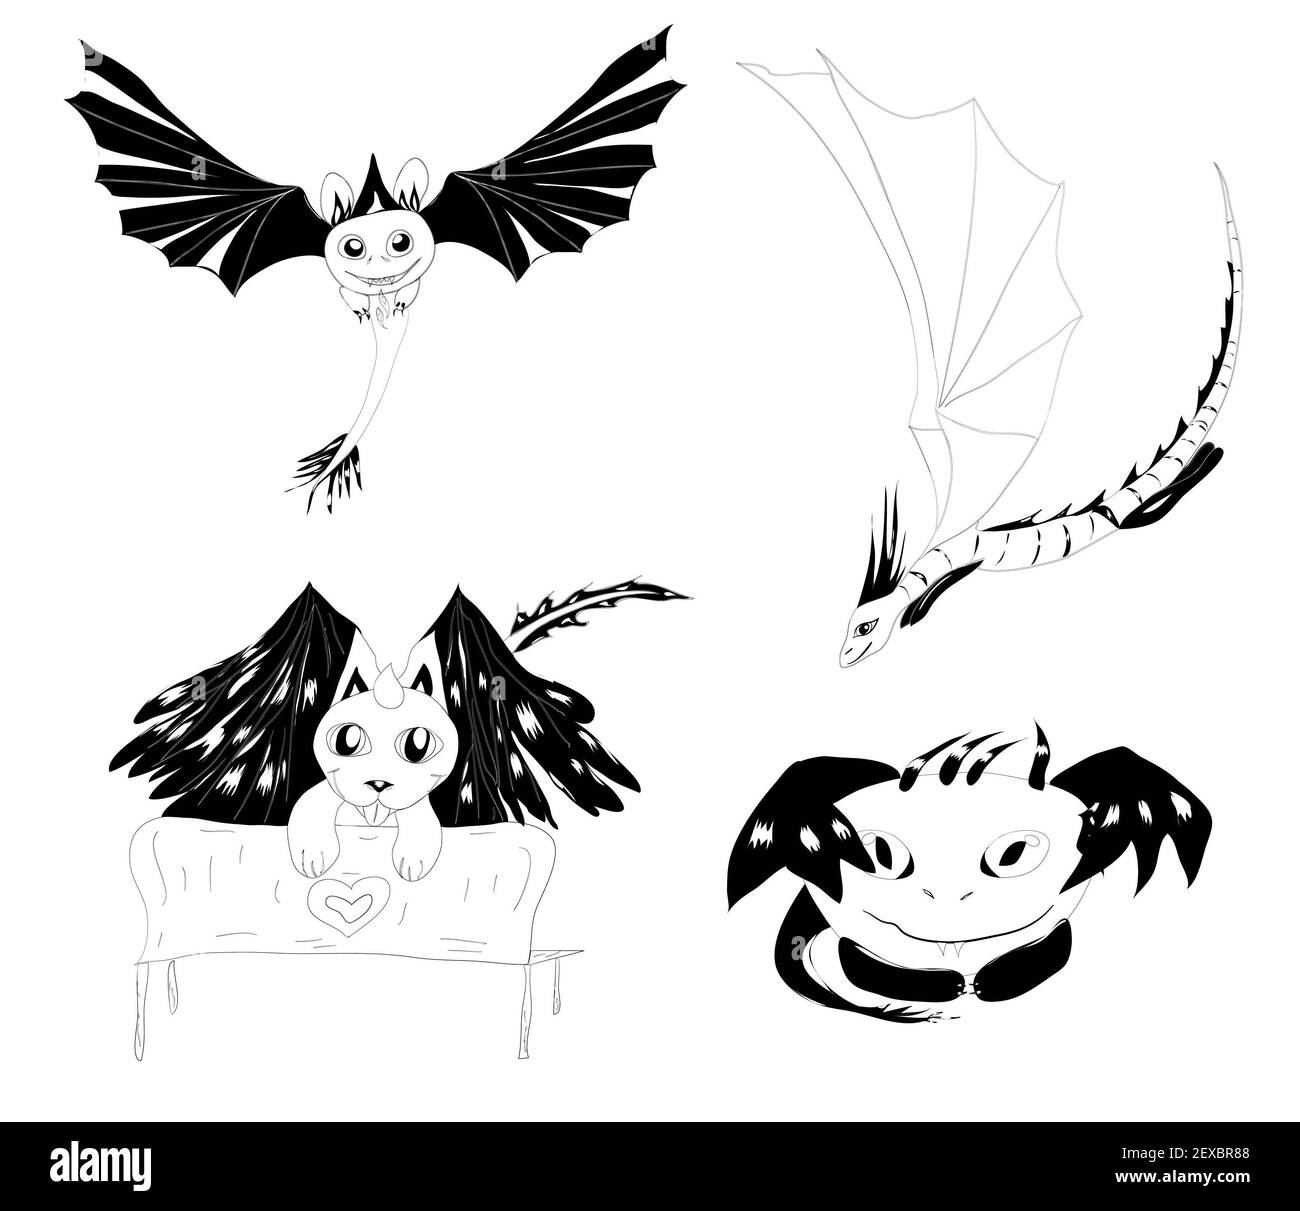 Vector set of 4 monsters silhouettes Stock Photo